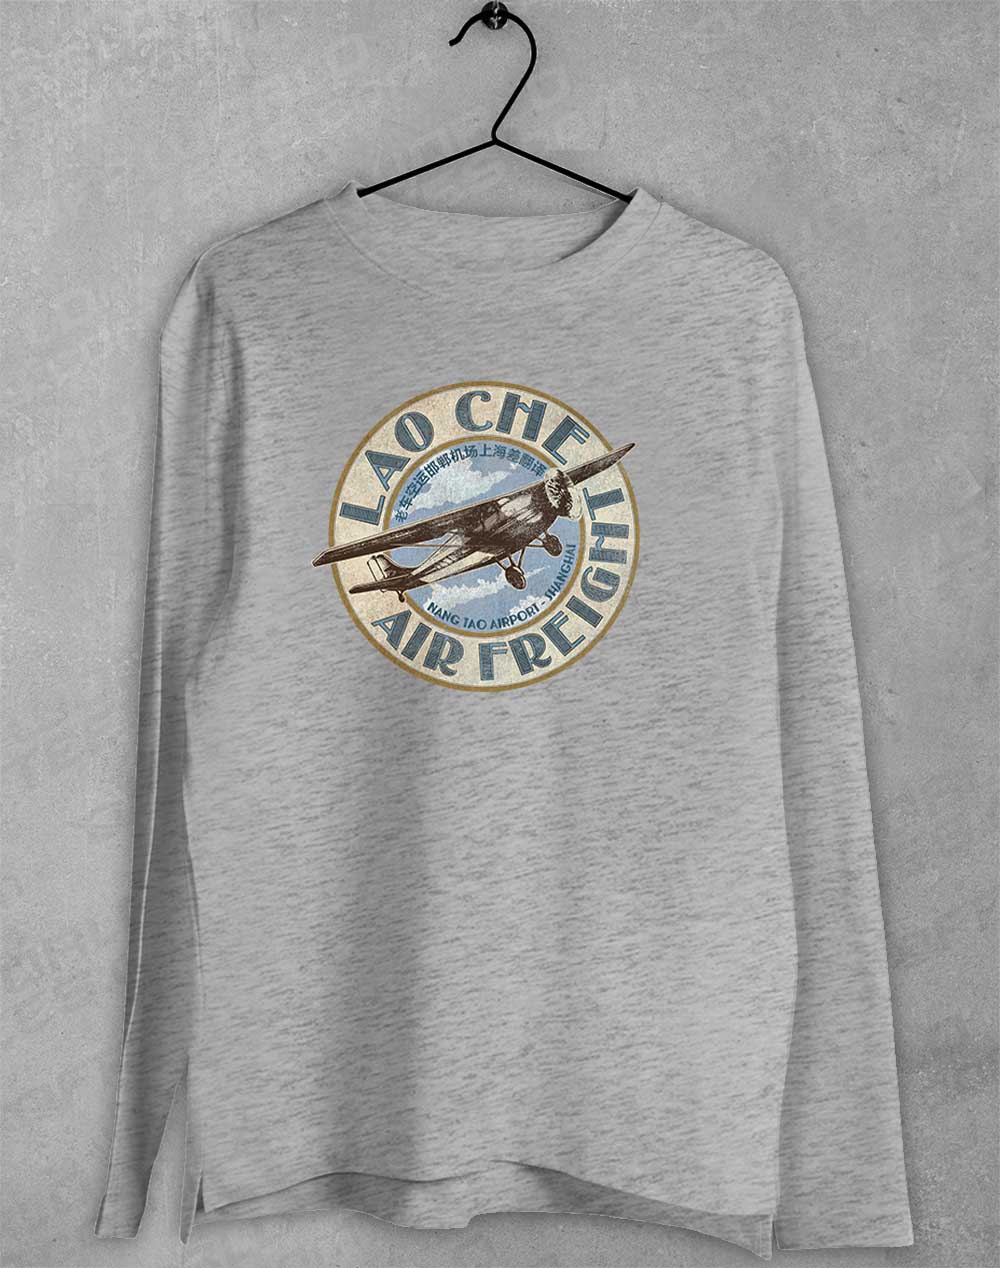 Sport Grey - Lao Che Air Freight Long Sleeve T-Shirt